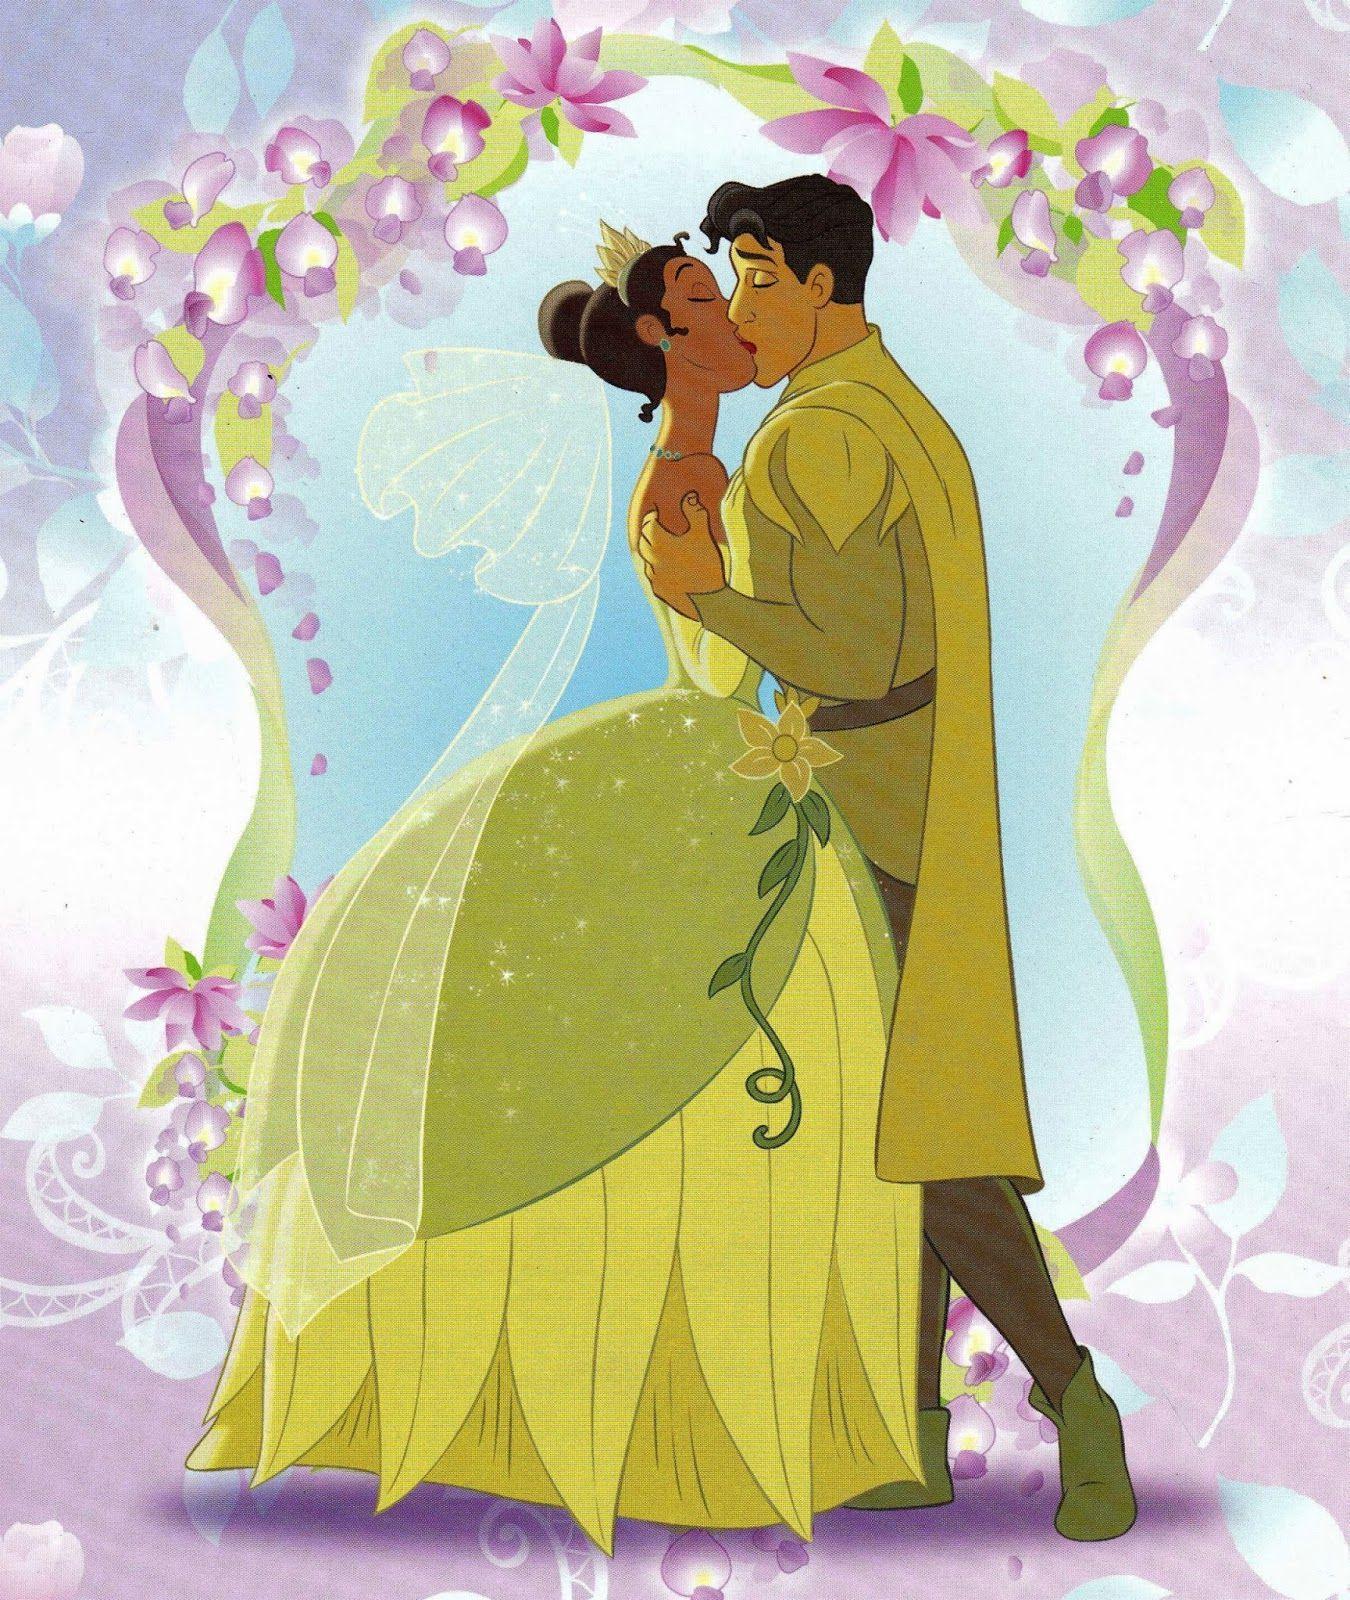 Tiana and naveen after wedding the princess and the frog wallpaper